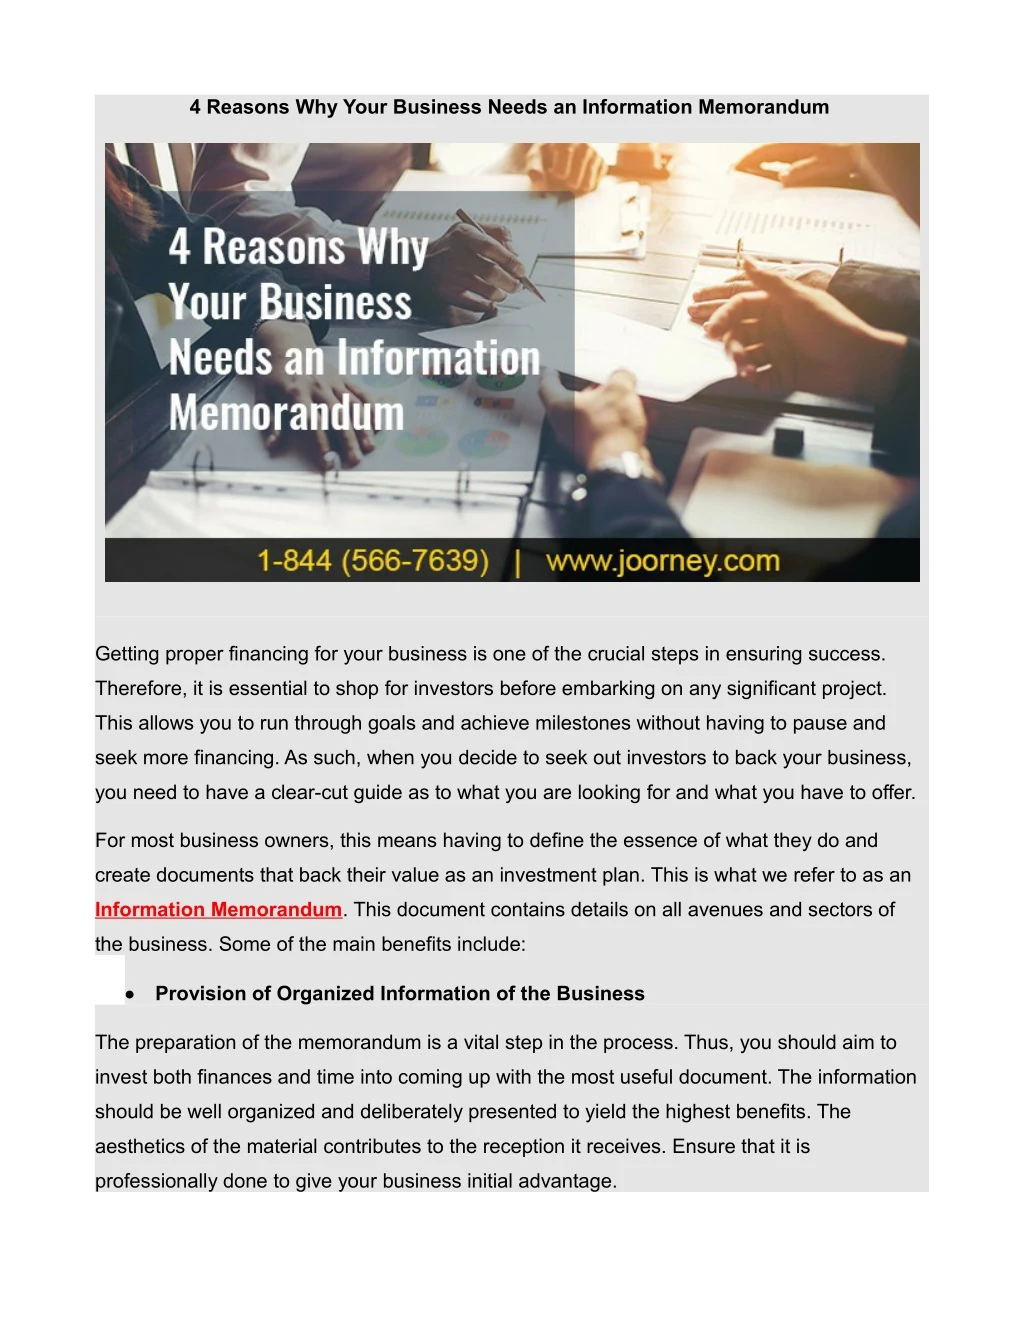 4 reasons why your business needs an information